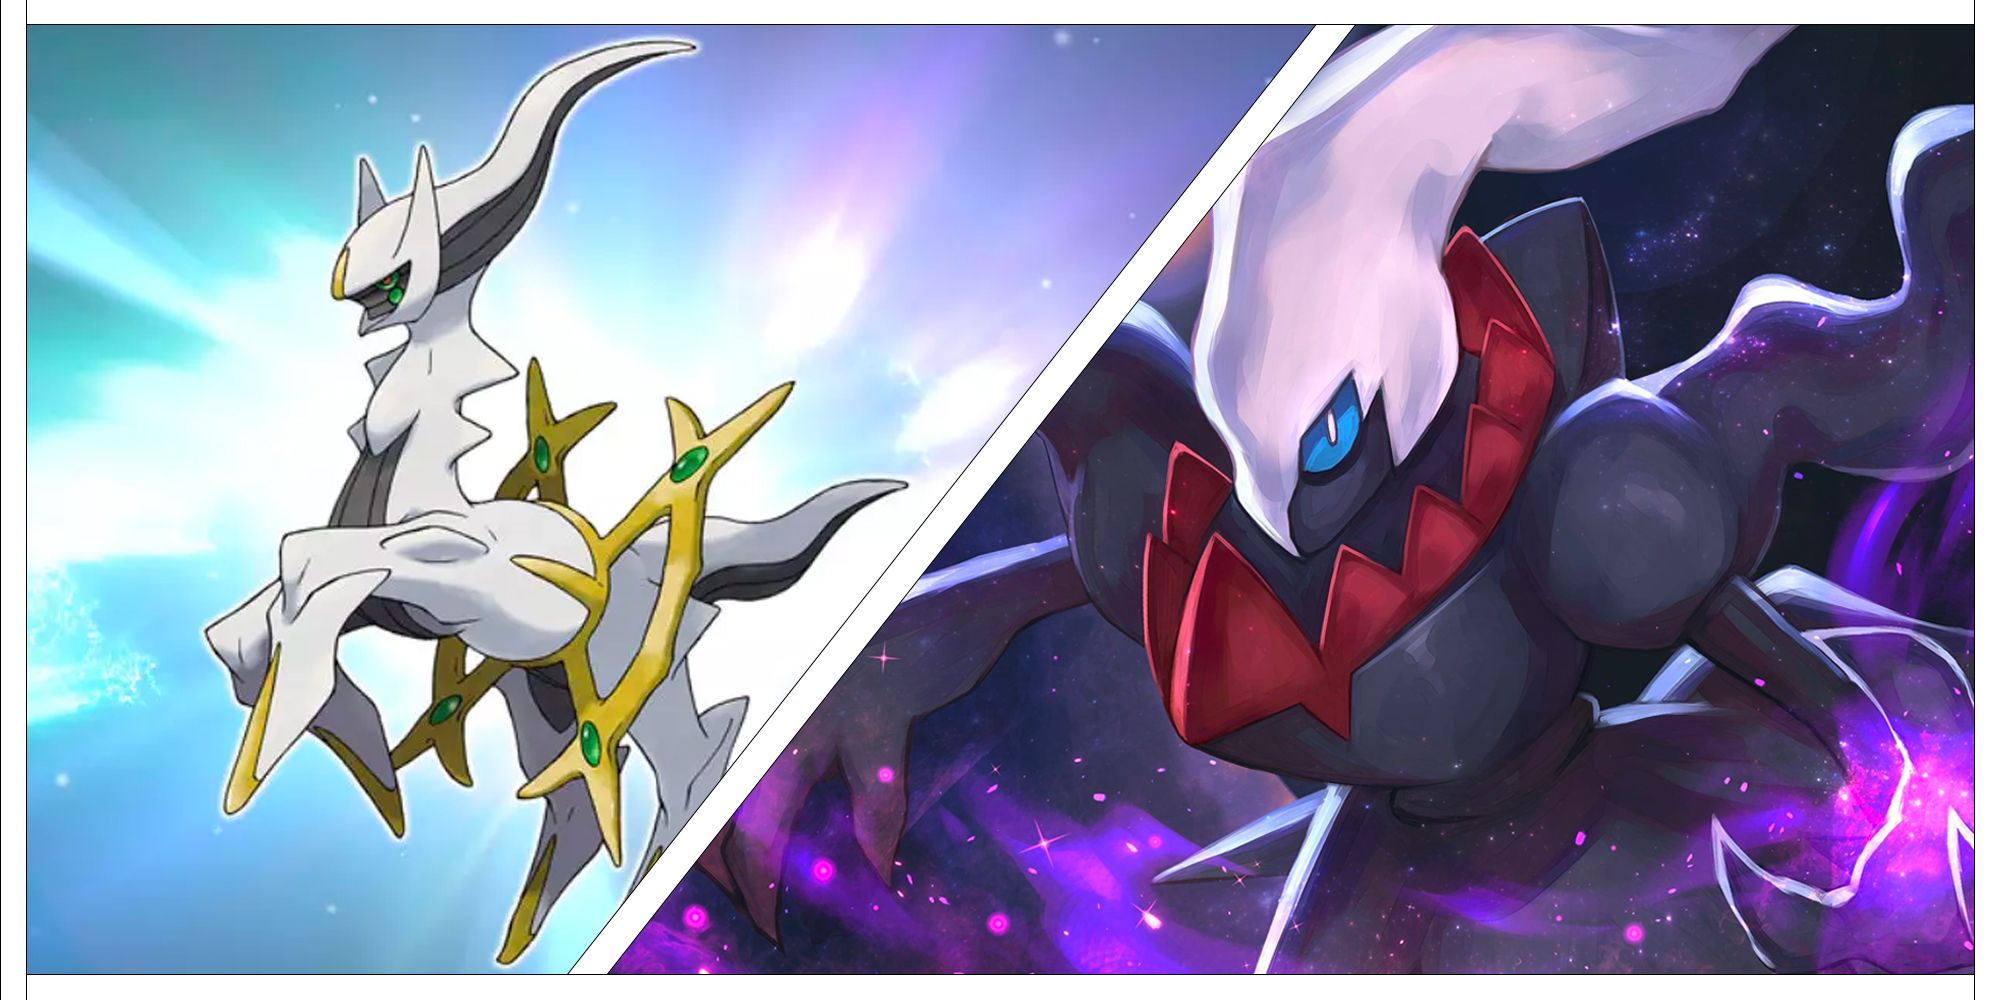 An Image of Arceus, the God of All Pokemon, Spliced Together With An Image Of Darkrai, the Pokemon of Darkness Incarnate.